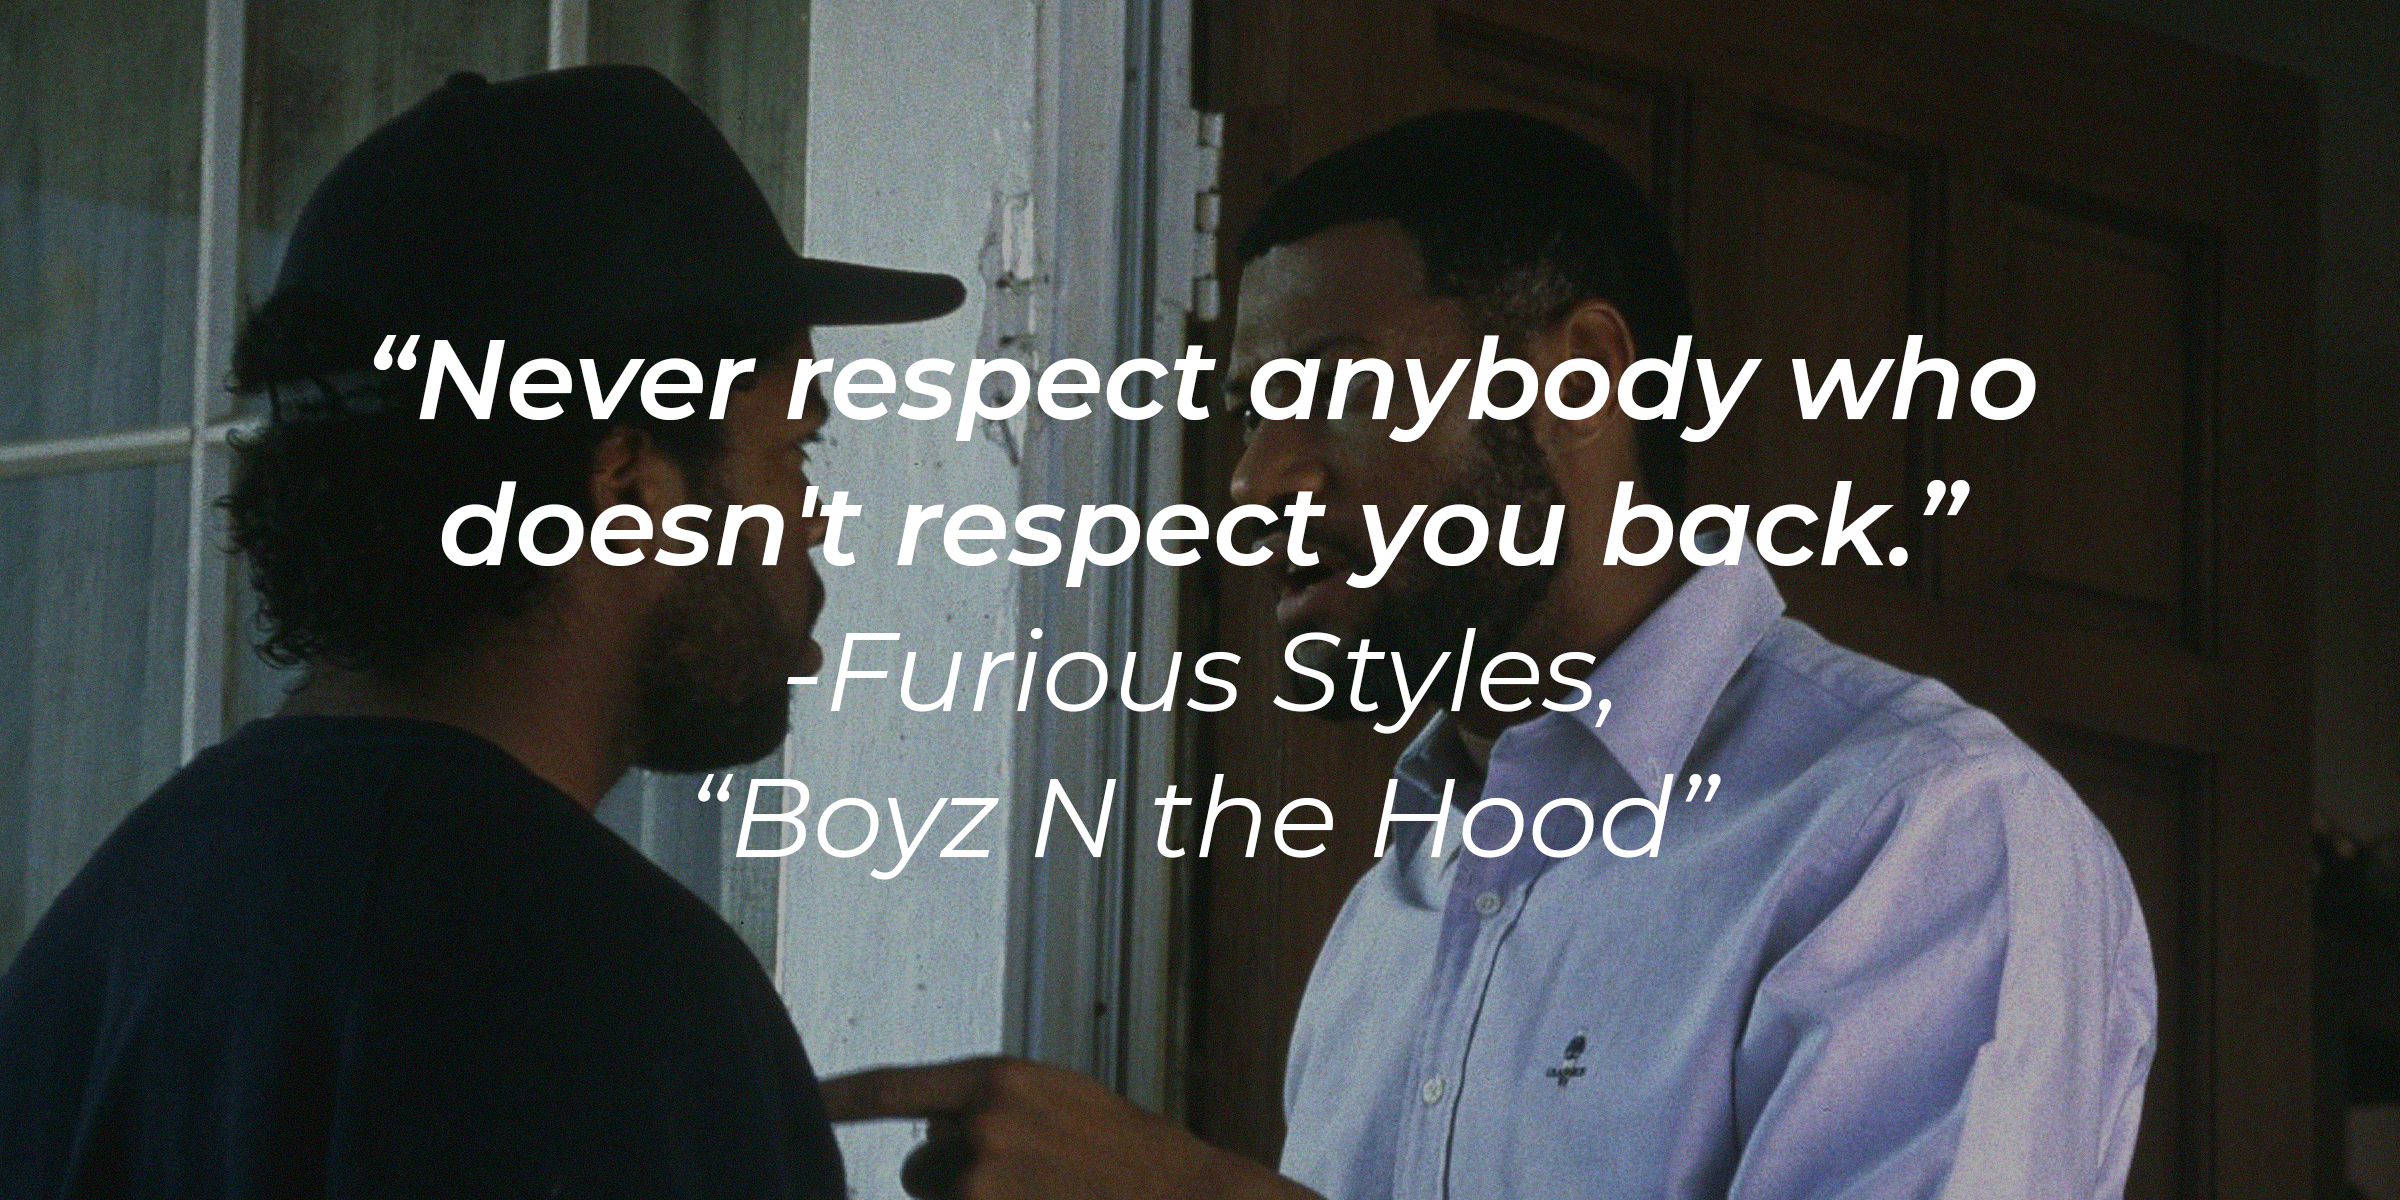 Tre Styles and Doughboy with Furious Styles' quote: “Never respect anybody who doesn't respect you back.” | Source: Facebook.com/BoyzNtheHood